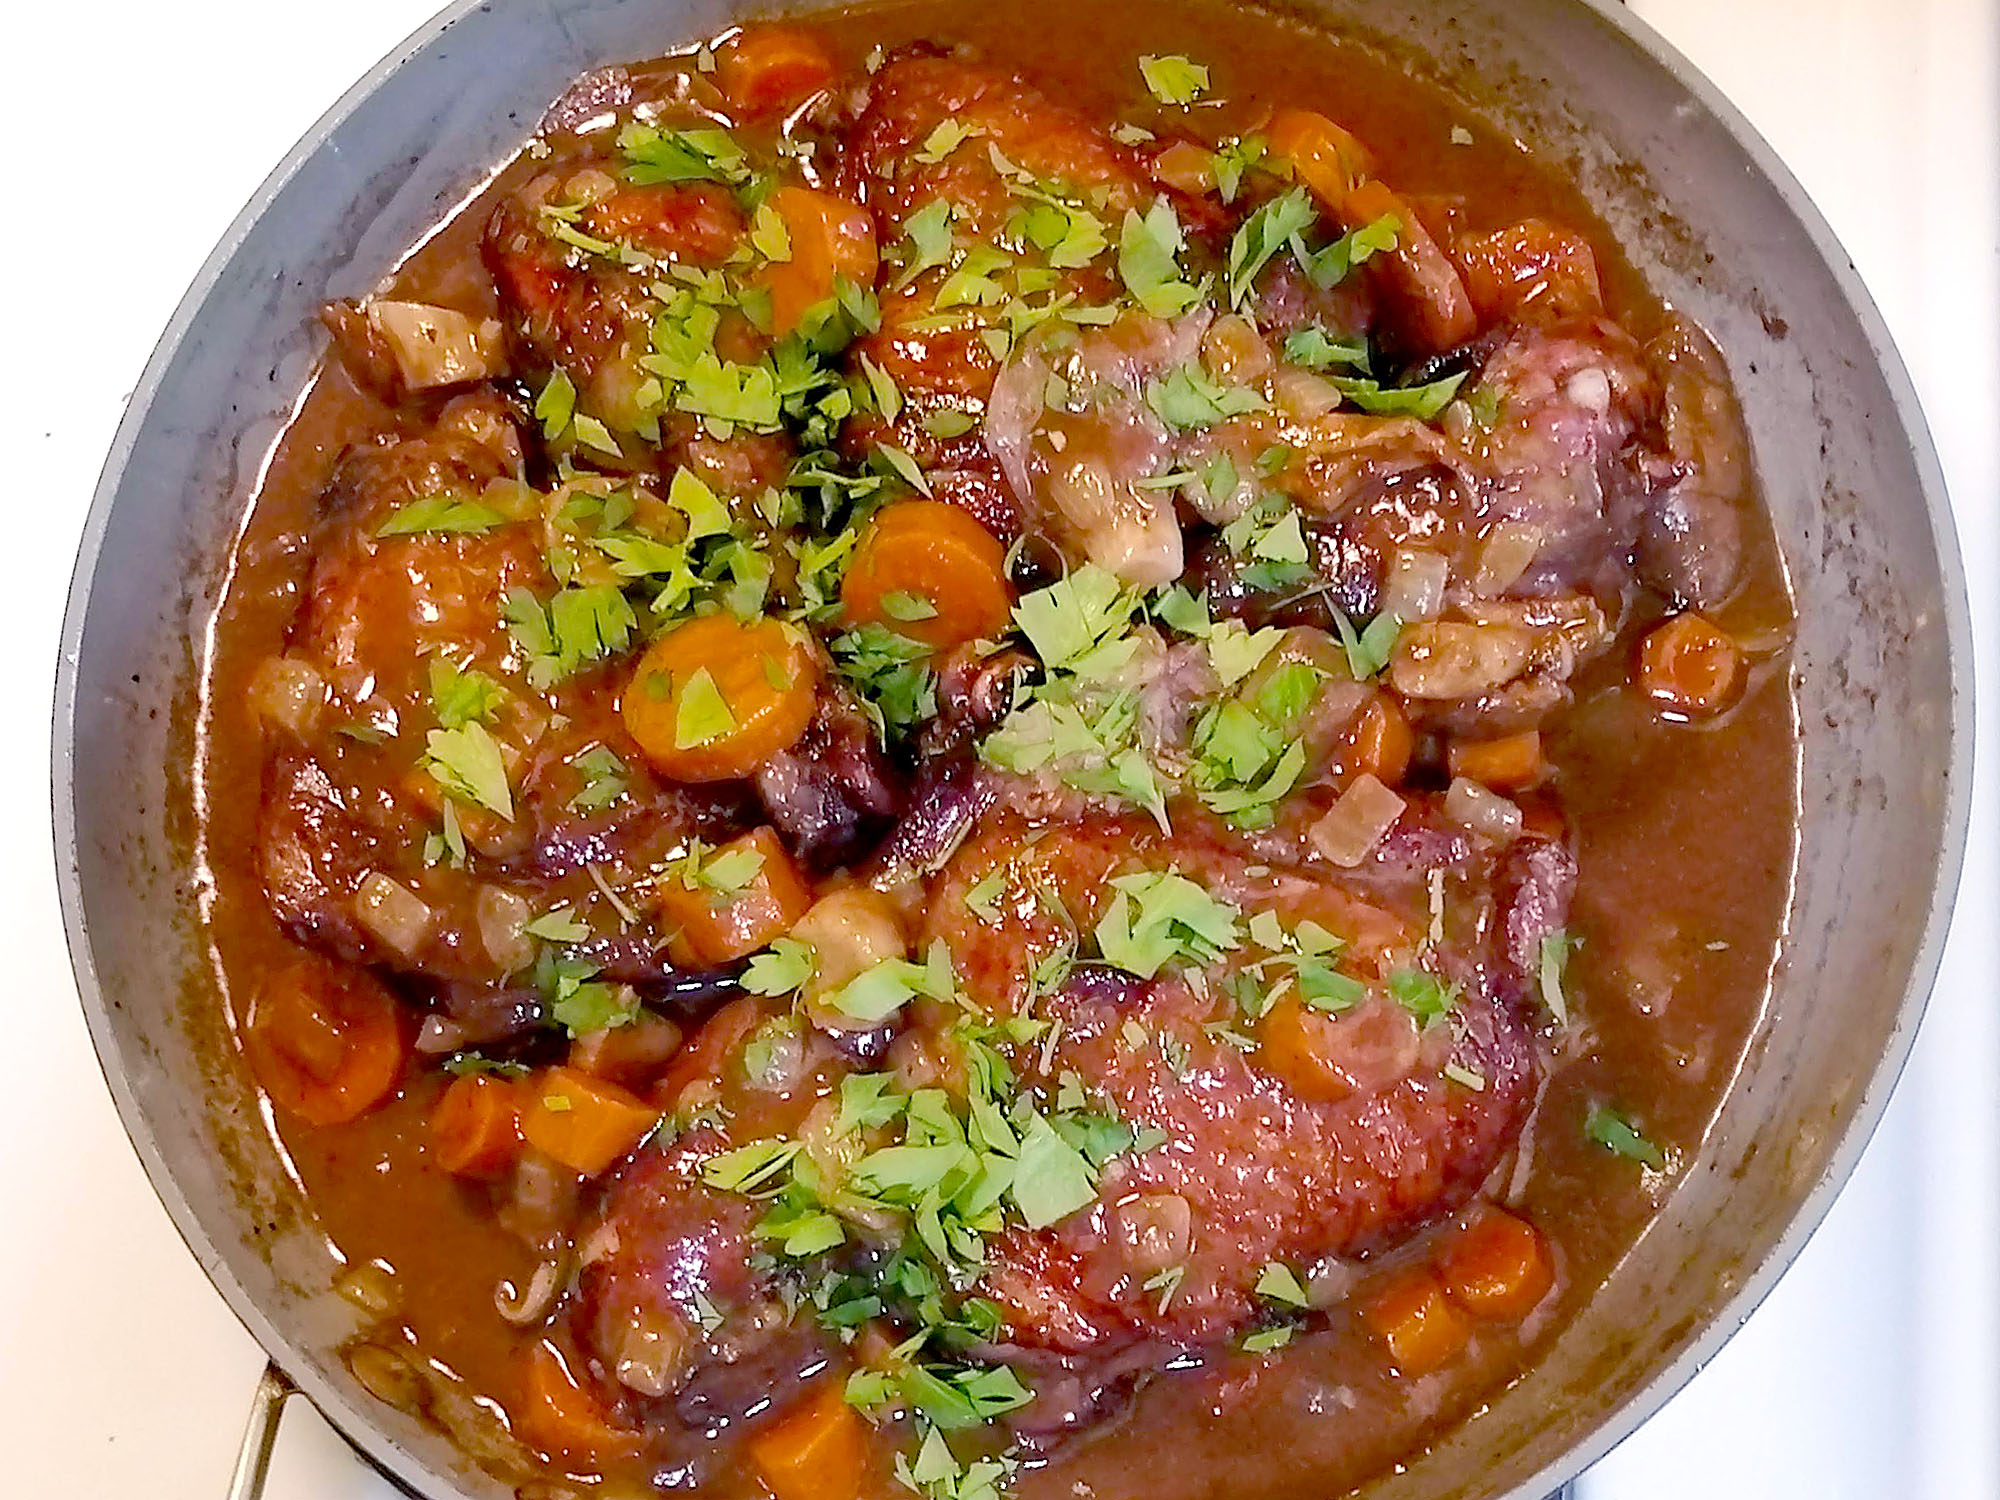 A skillet containing chicken, mushrooms, and carrots in a rich red wine sauce garnished with chopped parsley. Photo by Paul Young. 